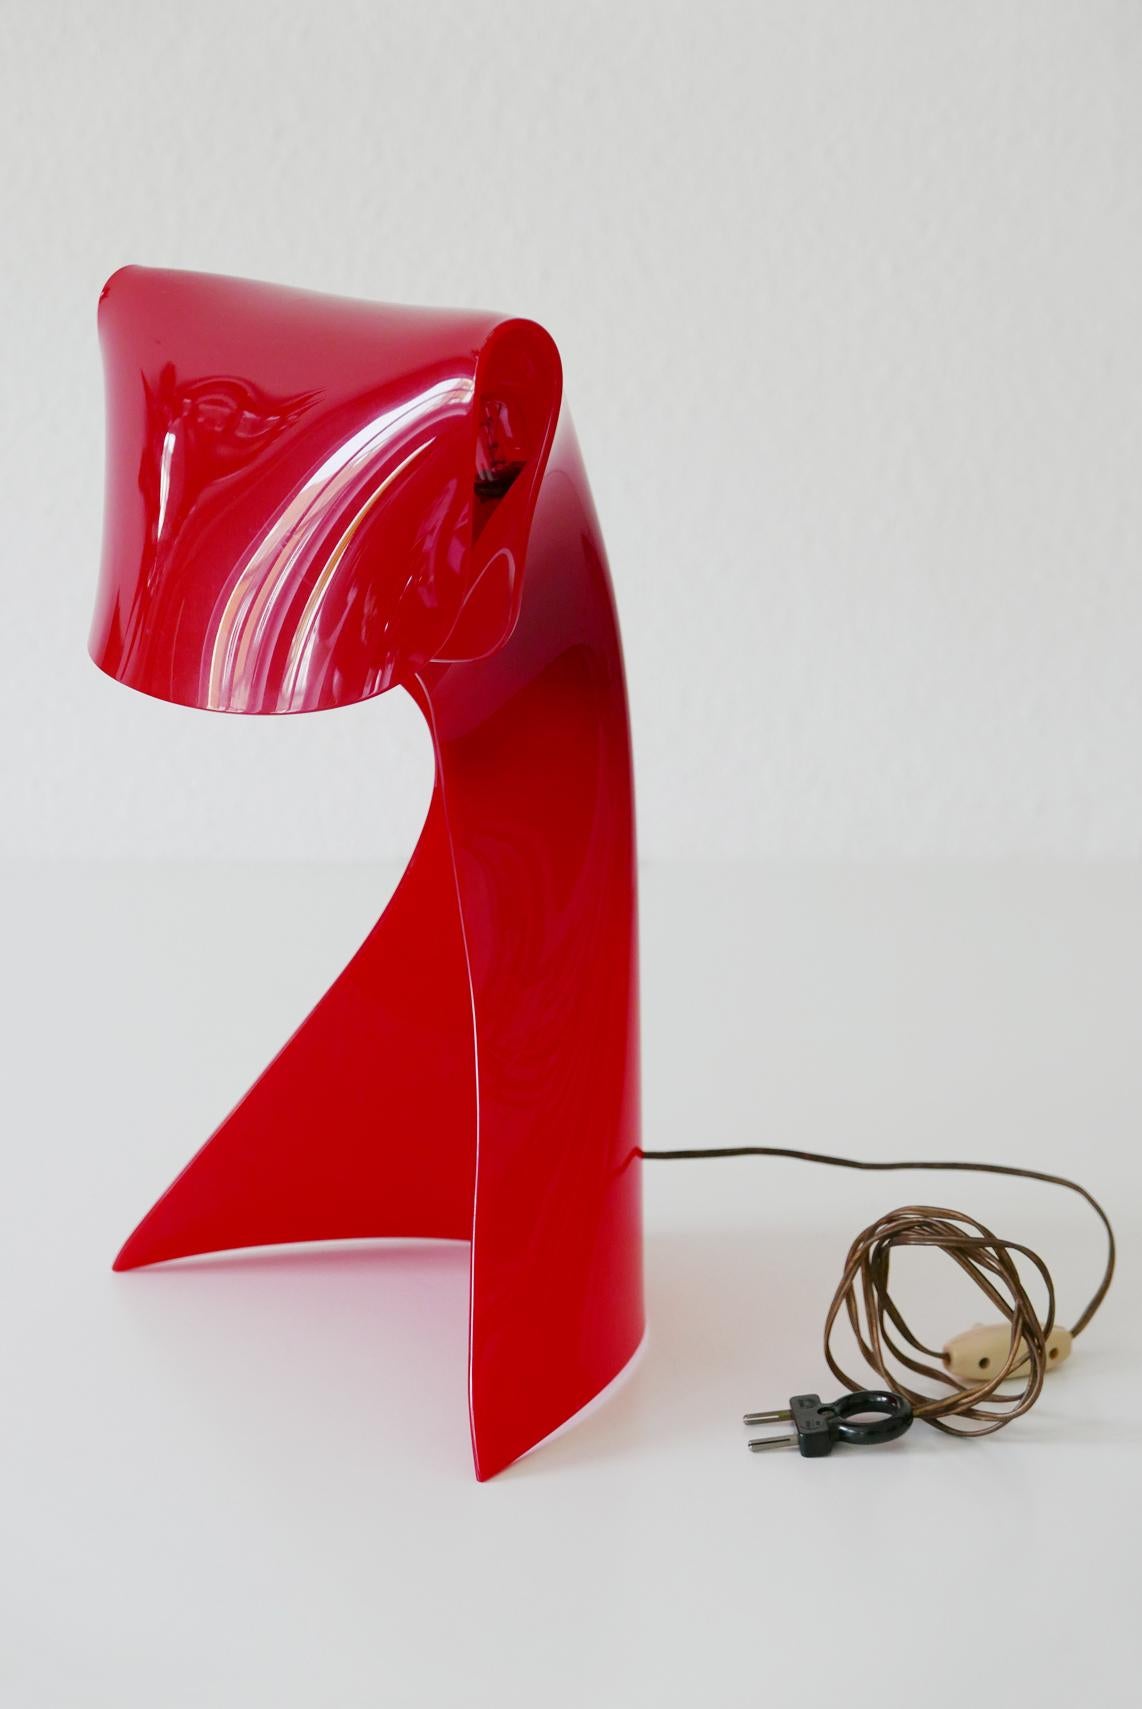 Exceptional Table Lamp by Hanns Hoffmann-Lederer for Heinz Hecht, 1950s, Germany For Sale 12